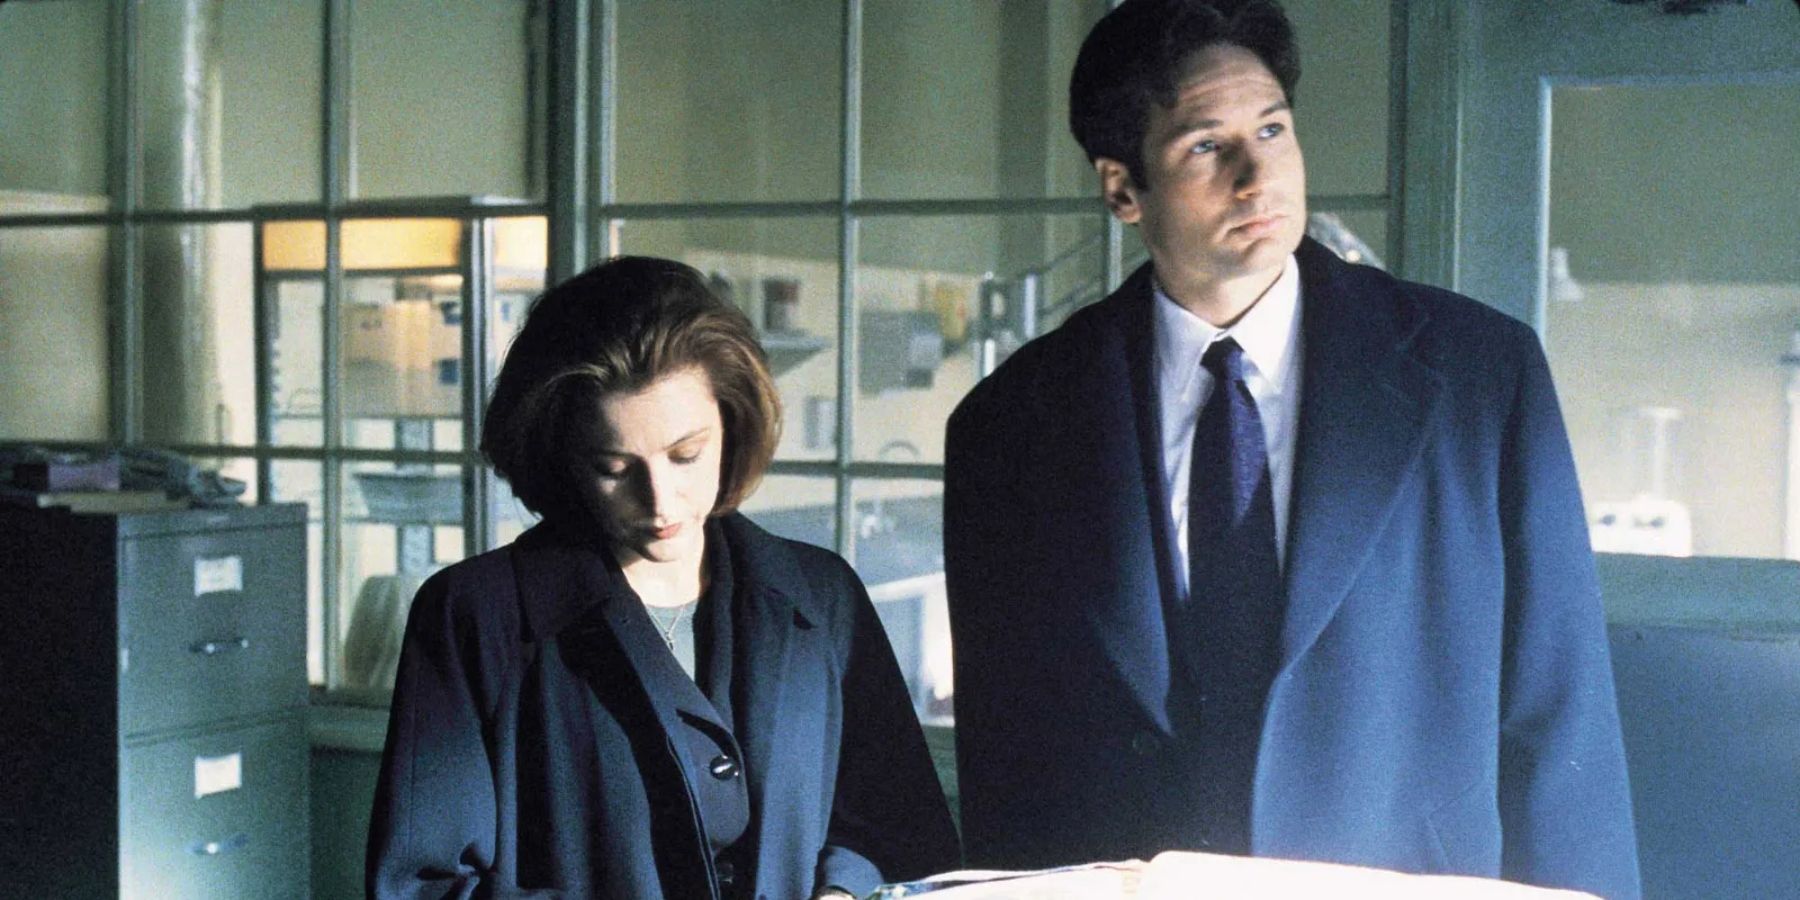 Special Agents Fox Mulder (David Duchovny) and Dana Scully (Gillian Anderson) in The X-Files